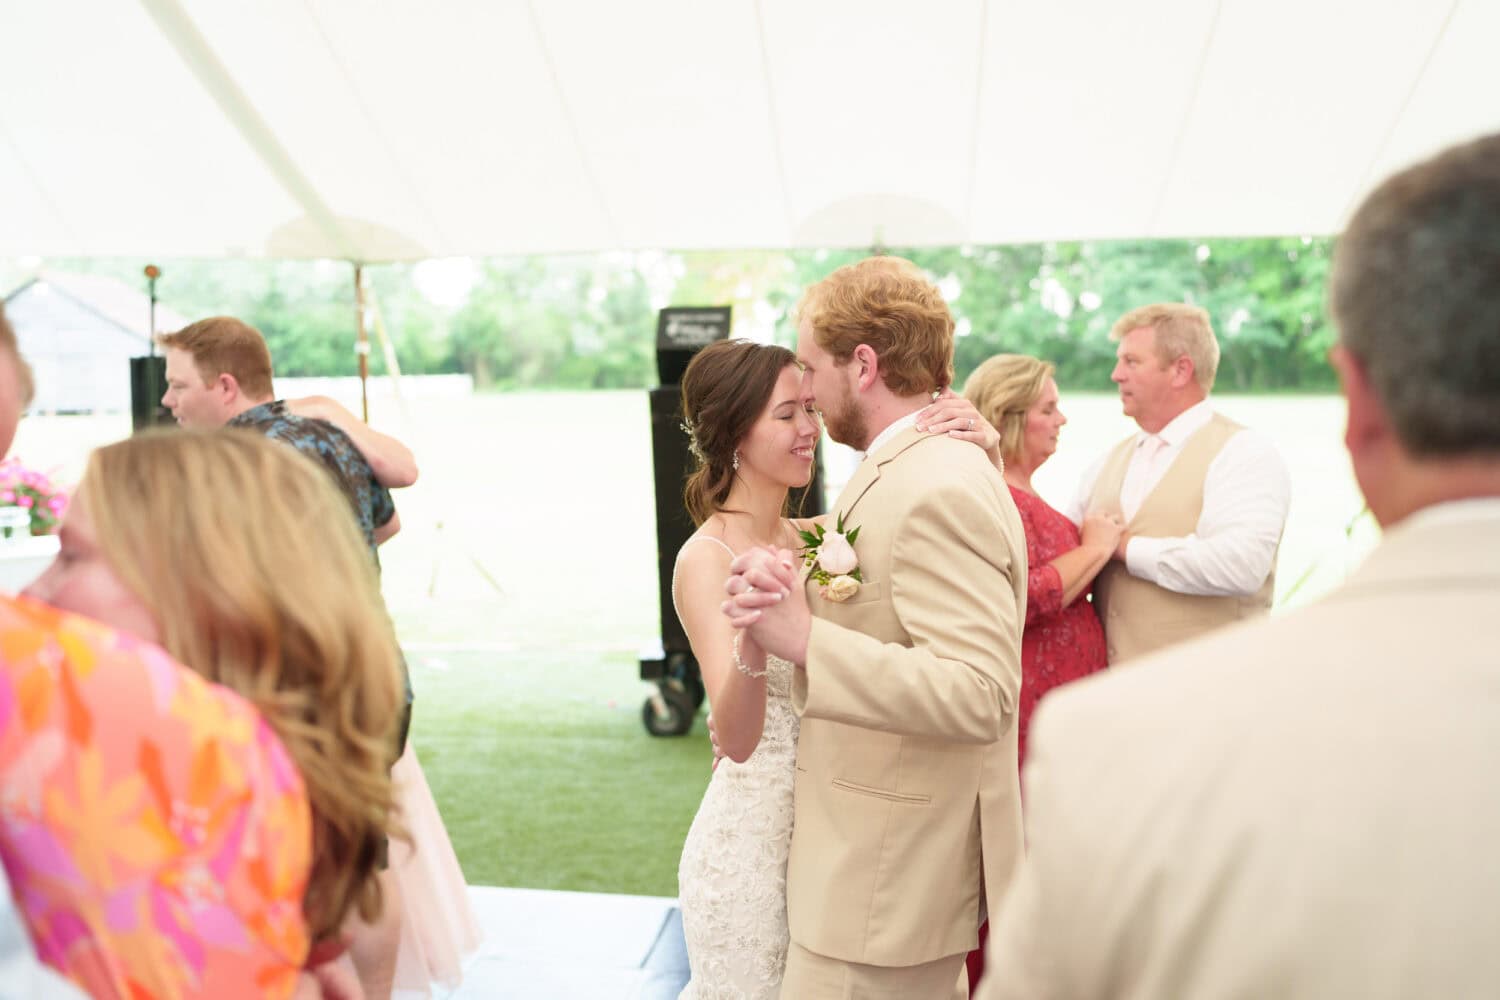 Dancing under the tent - Tanglewood Plantation